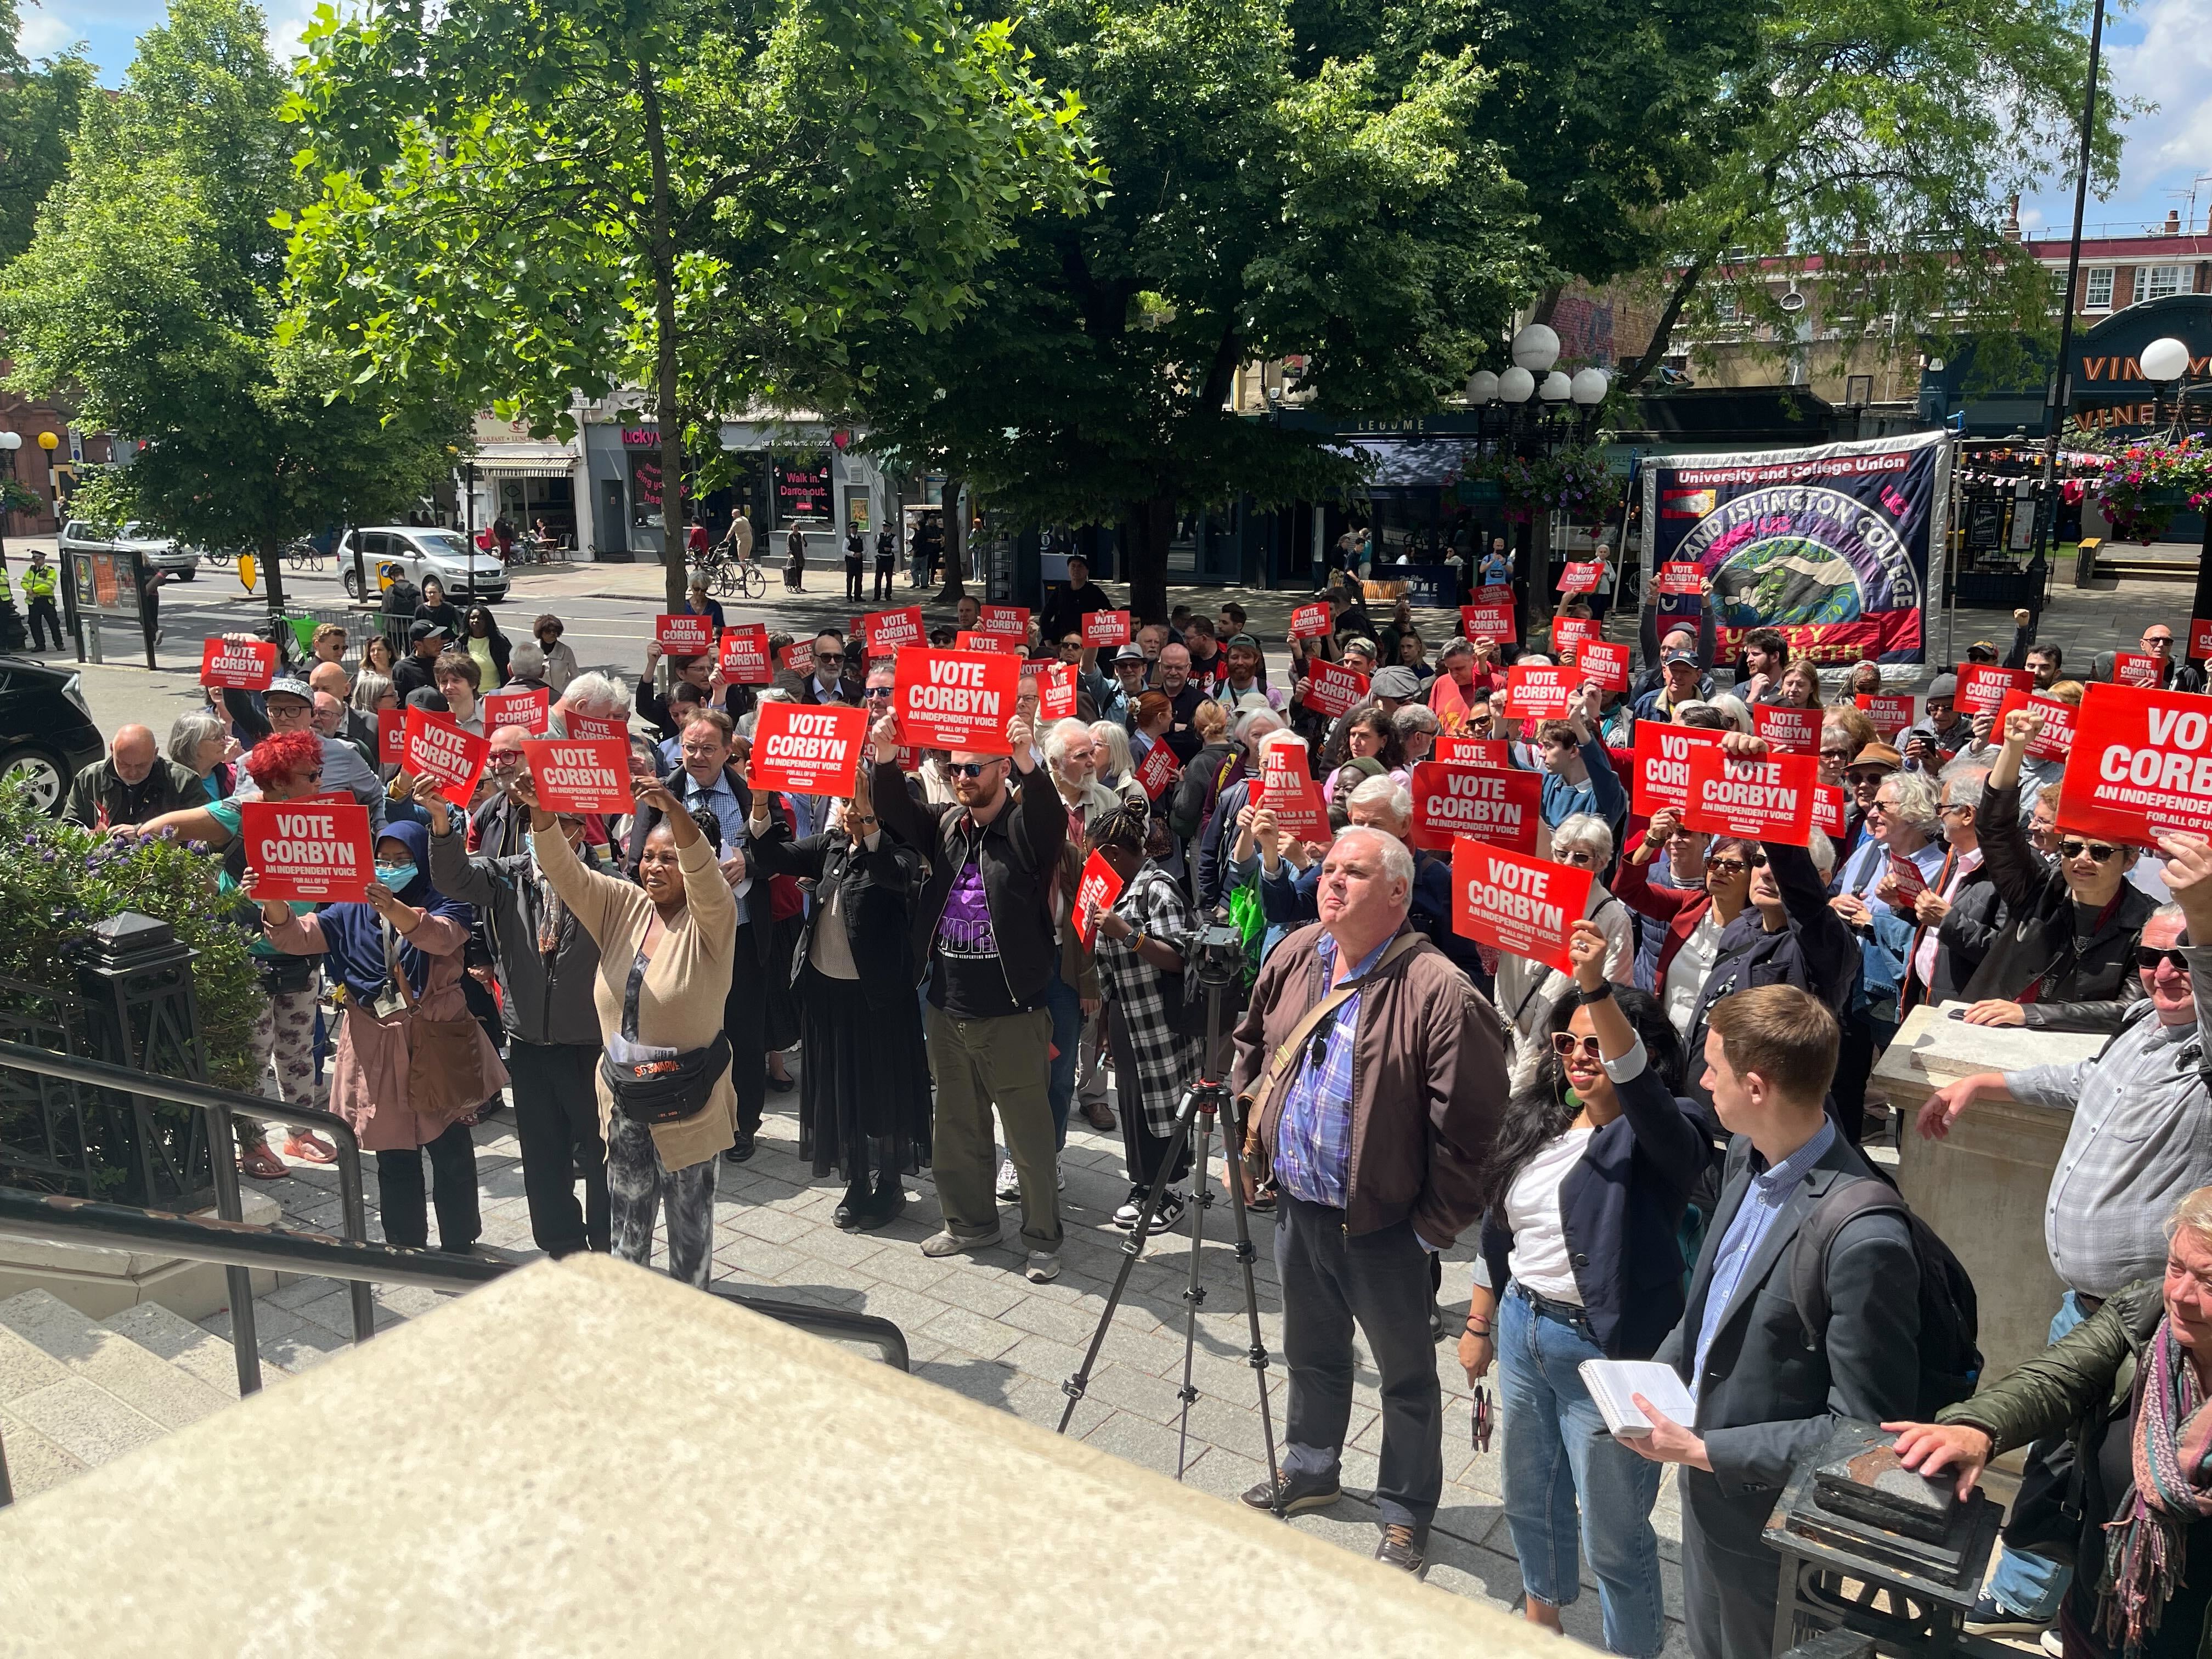 Supporters gathered in Islington for Mr Corbyn's launch